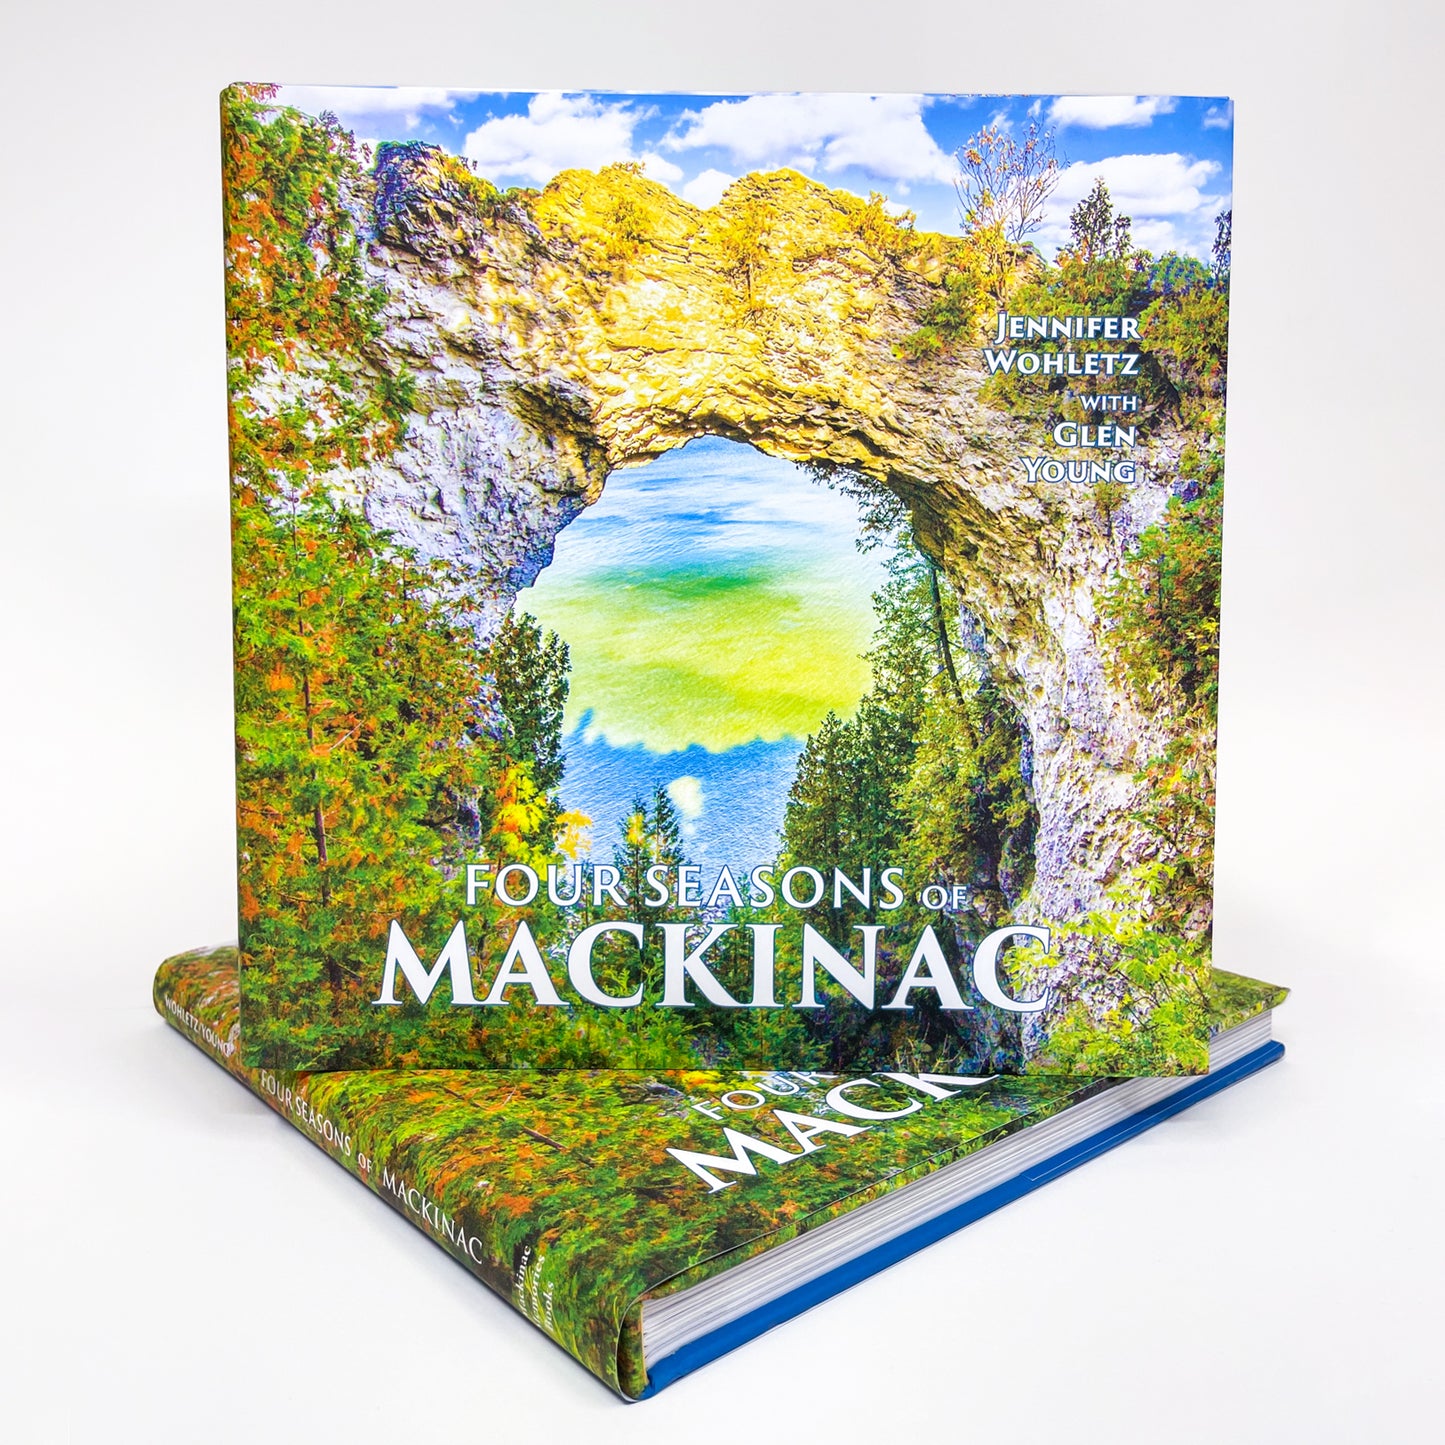 Arch Rock's Shadow in the Water featured on the cover of "Four Seasons of Mackinac."